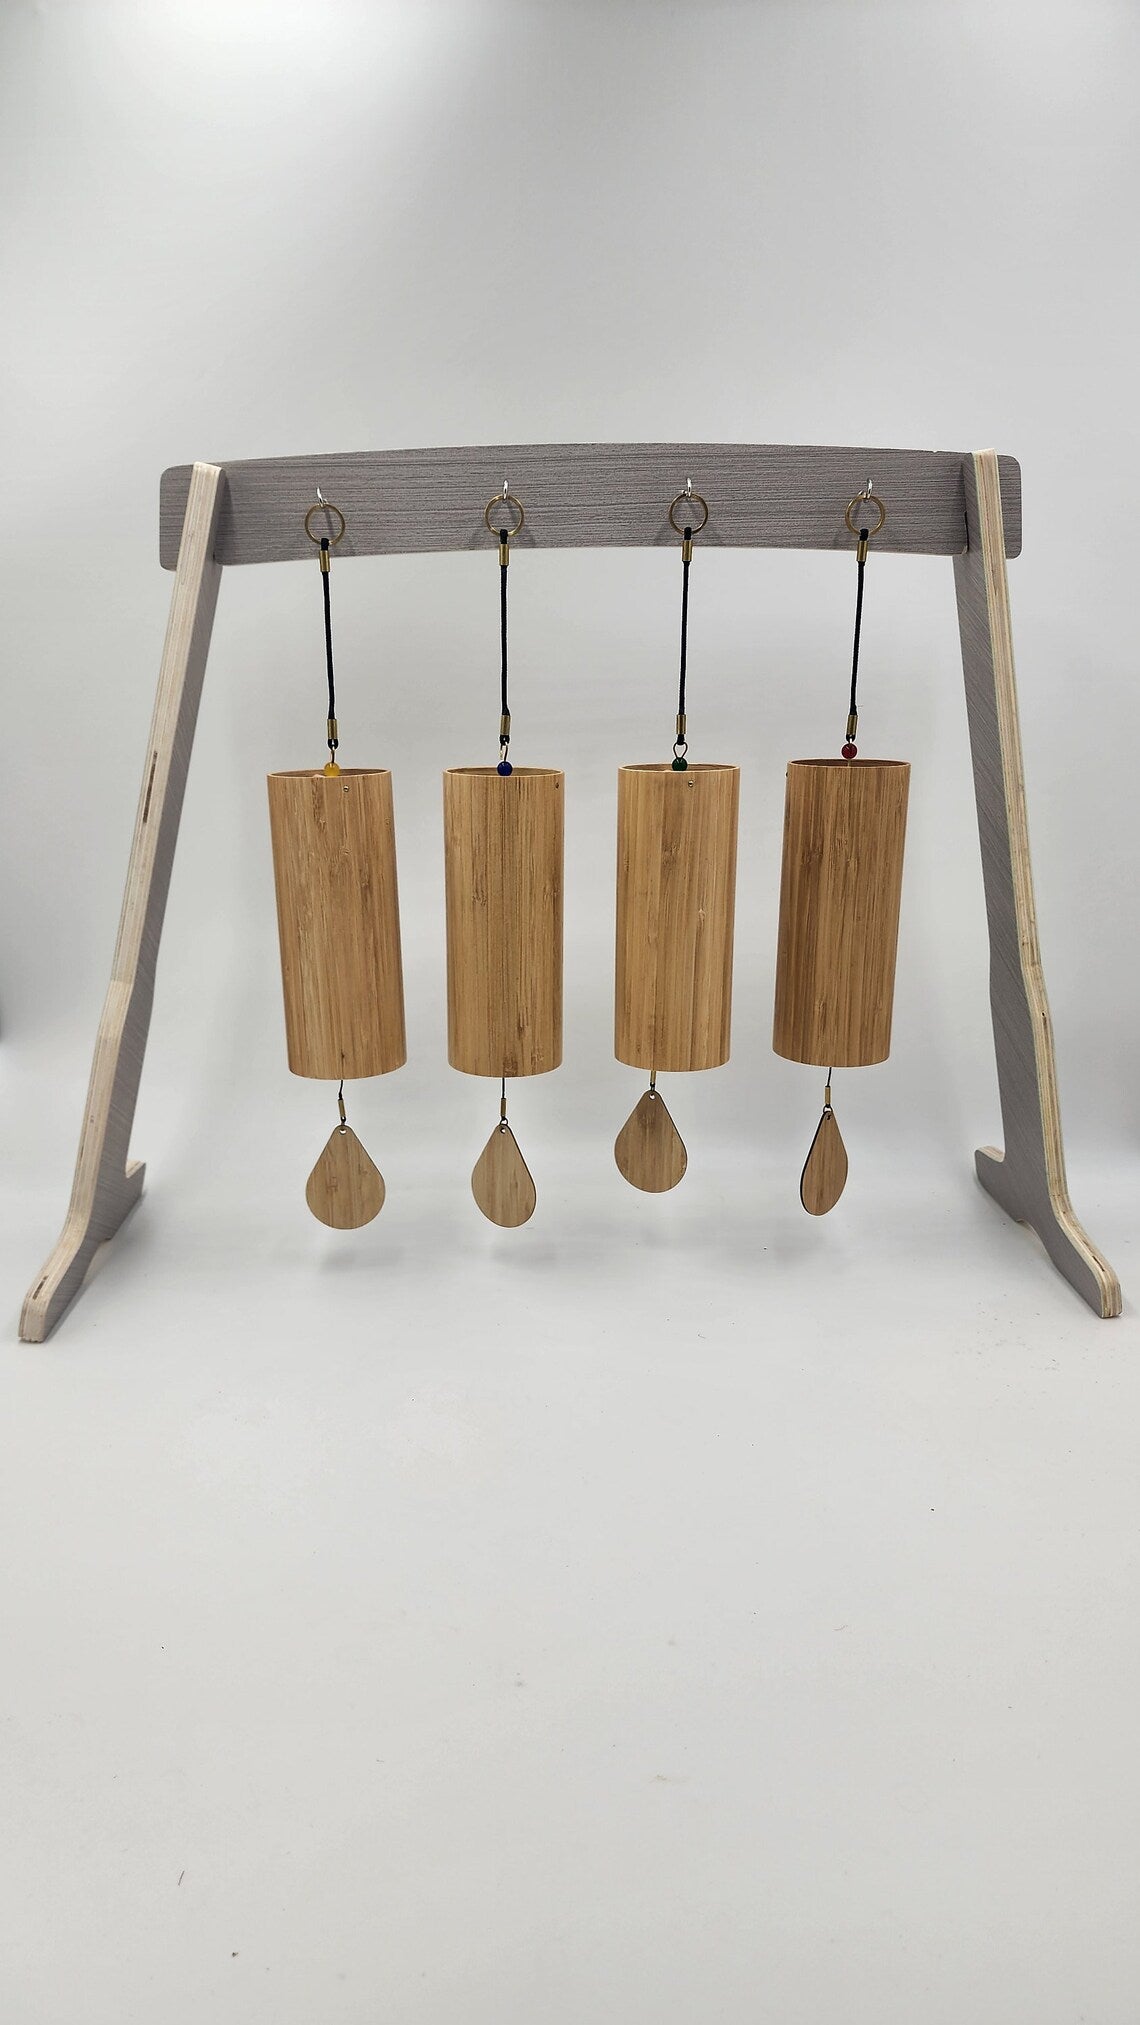 Set of 4 Wooden Chimes includes all the elements Fire Water Air and Earth